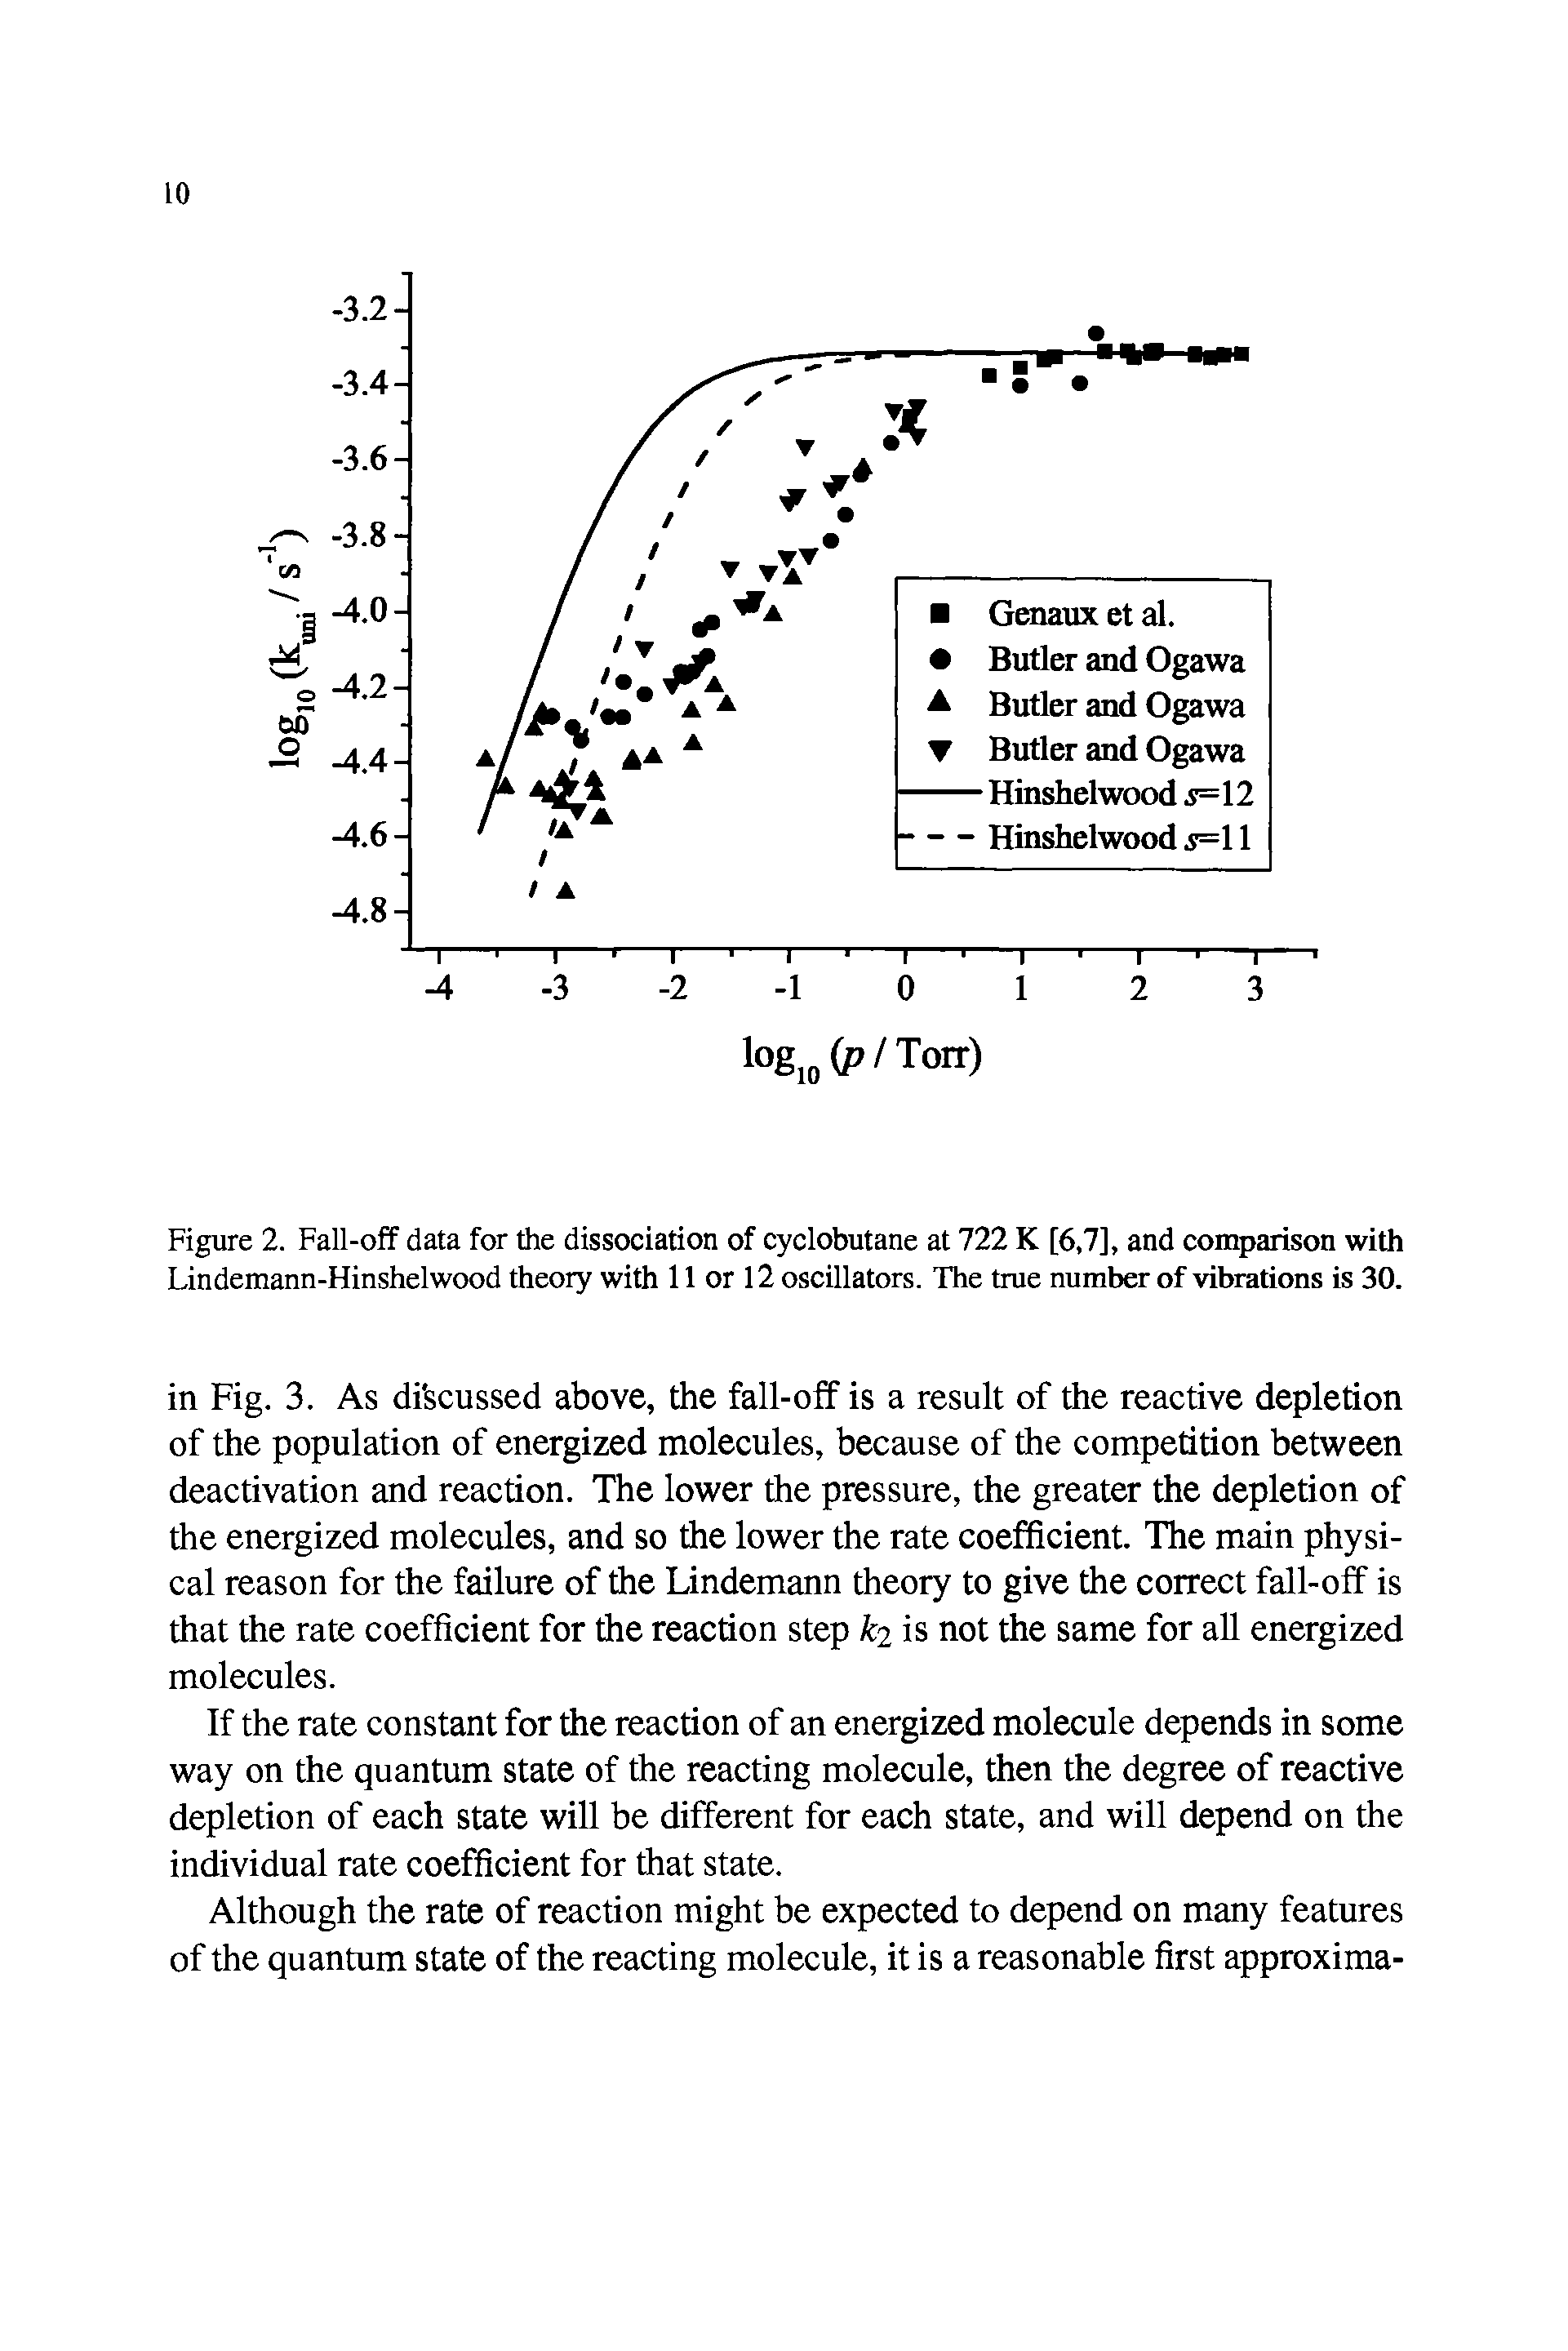 Figure 2. Fall-off data for the dissociation of cyclobutane at 722 K [6,7], and comparison with Lindemann-Hinshelwood theory with 11 or 12 oscillators. The true number of vibrations is 30.